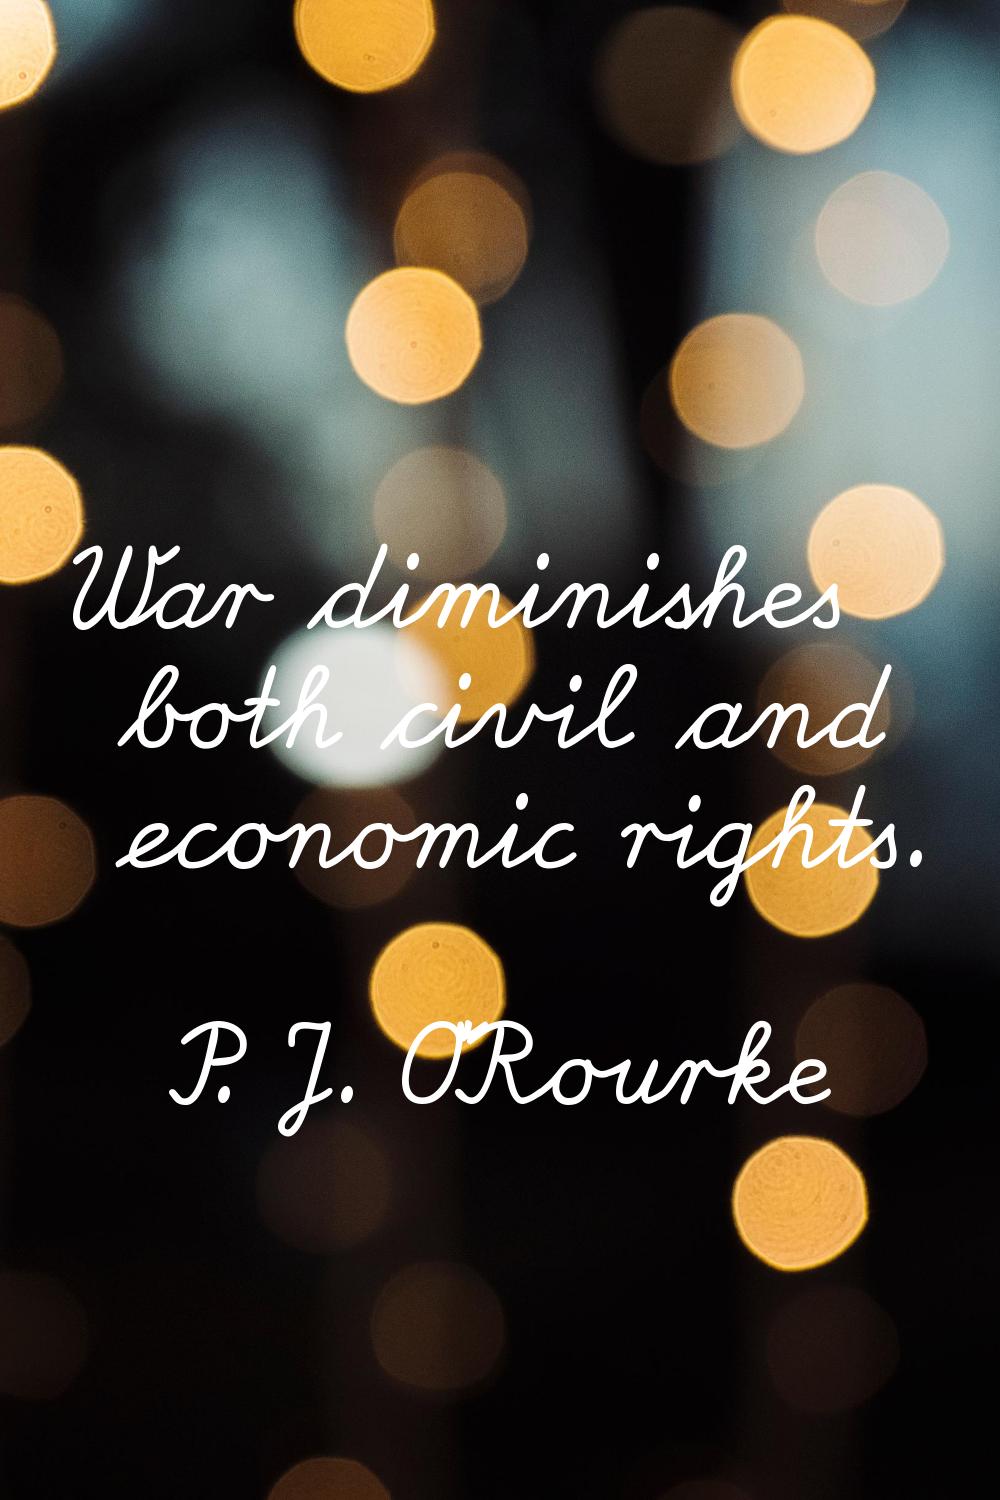 War diminishes both civil and economic rights.